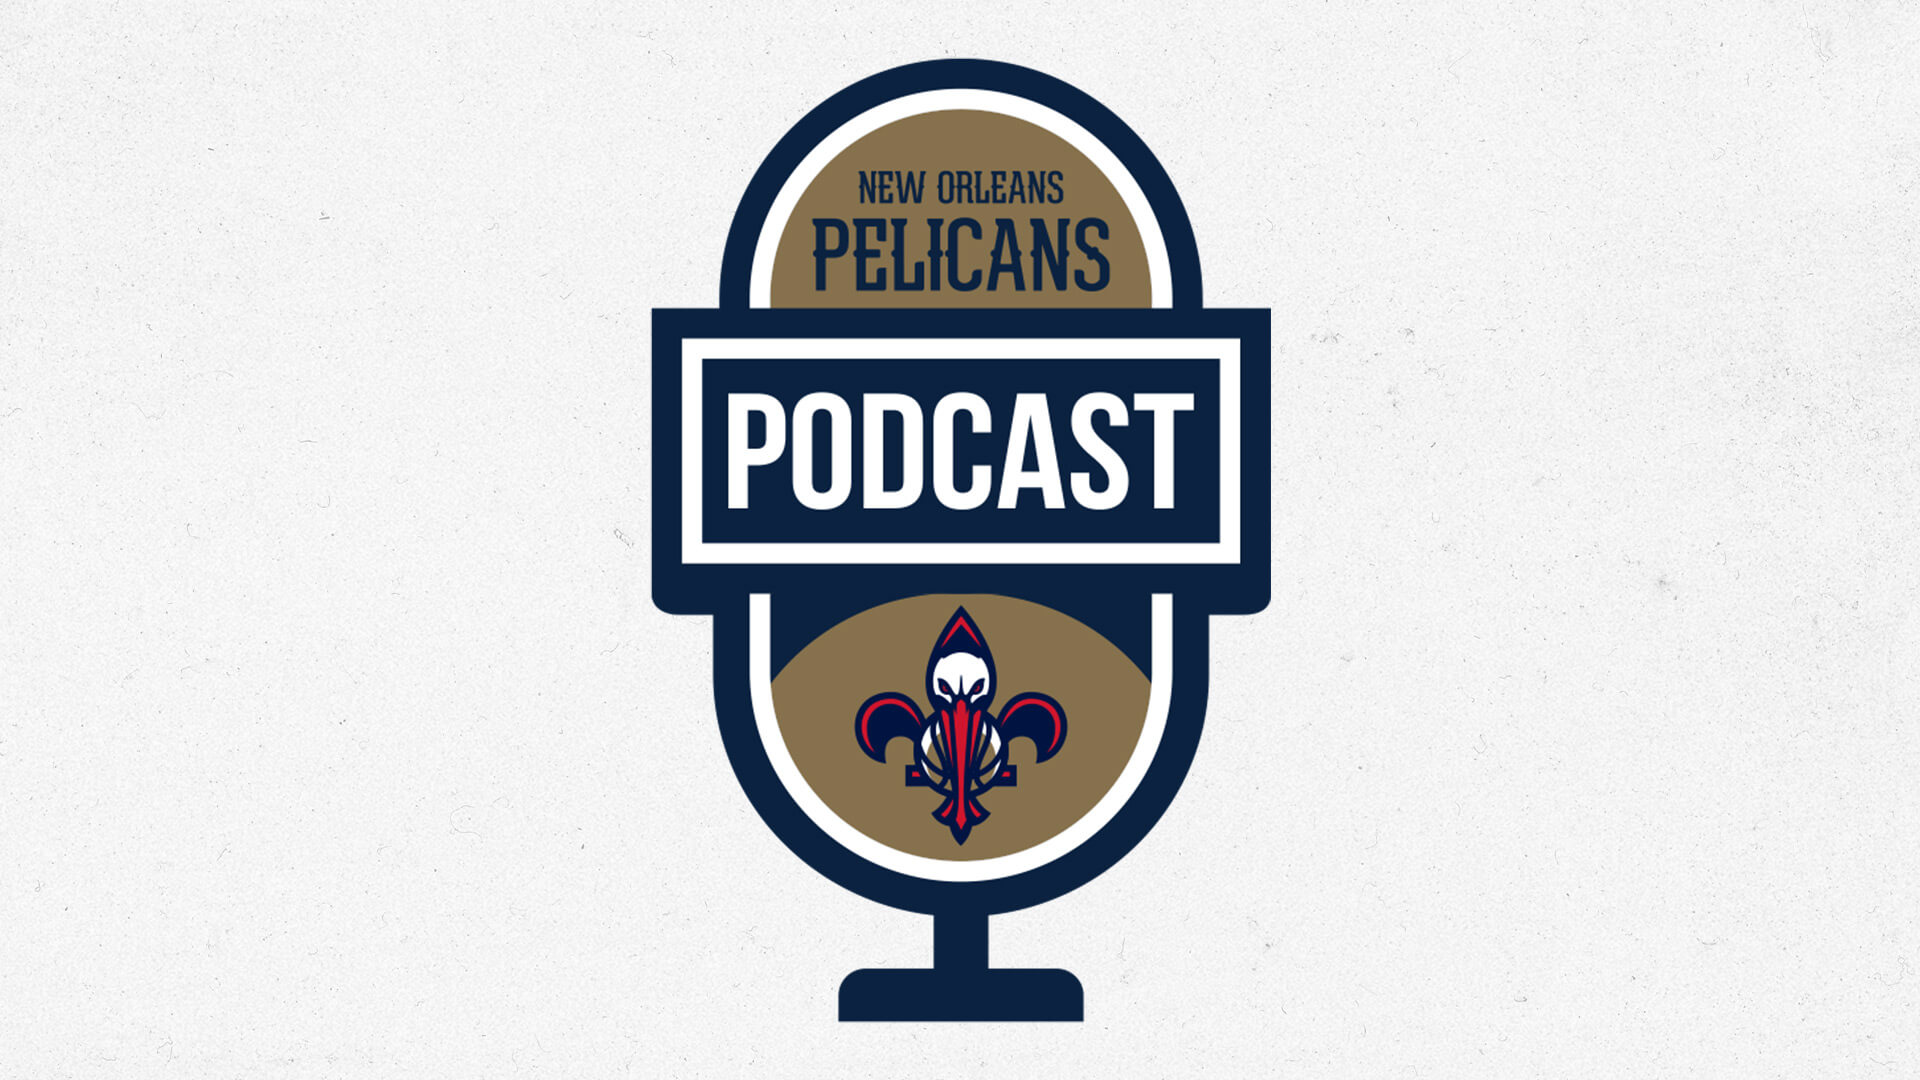 2020-2021 Player Recap: Nickeil Alexander-Walker on the New Orleans Pelicans podcast presented by SeatGeek - June 3, 2021